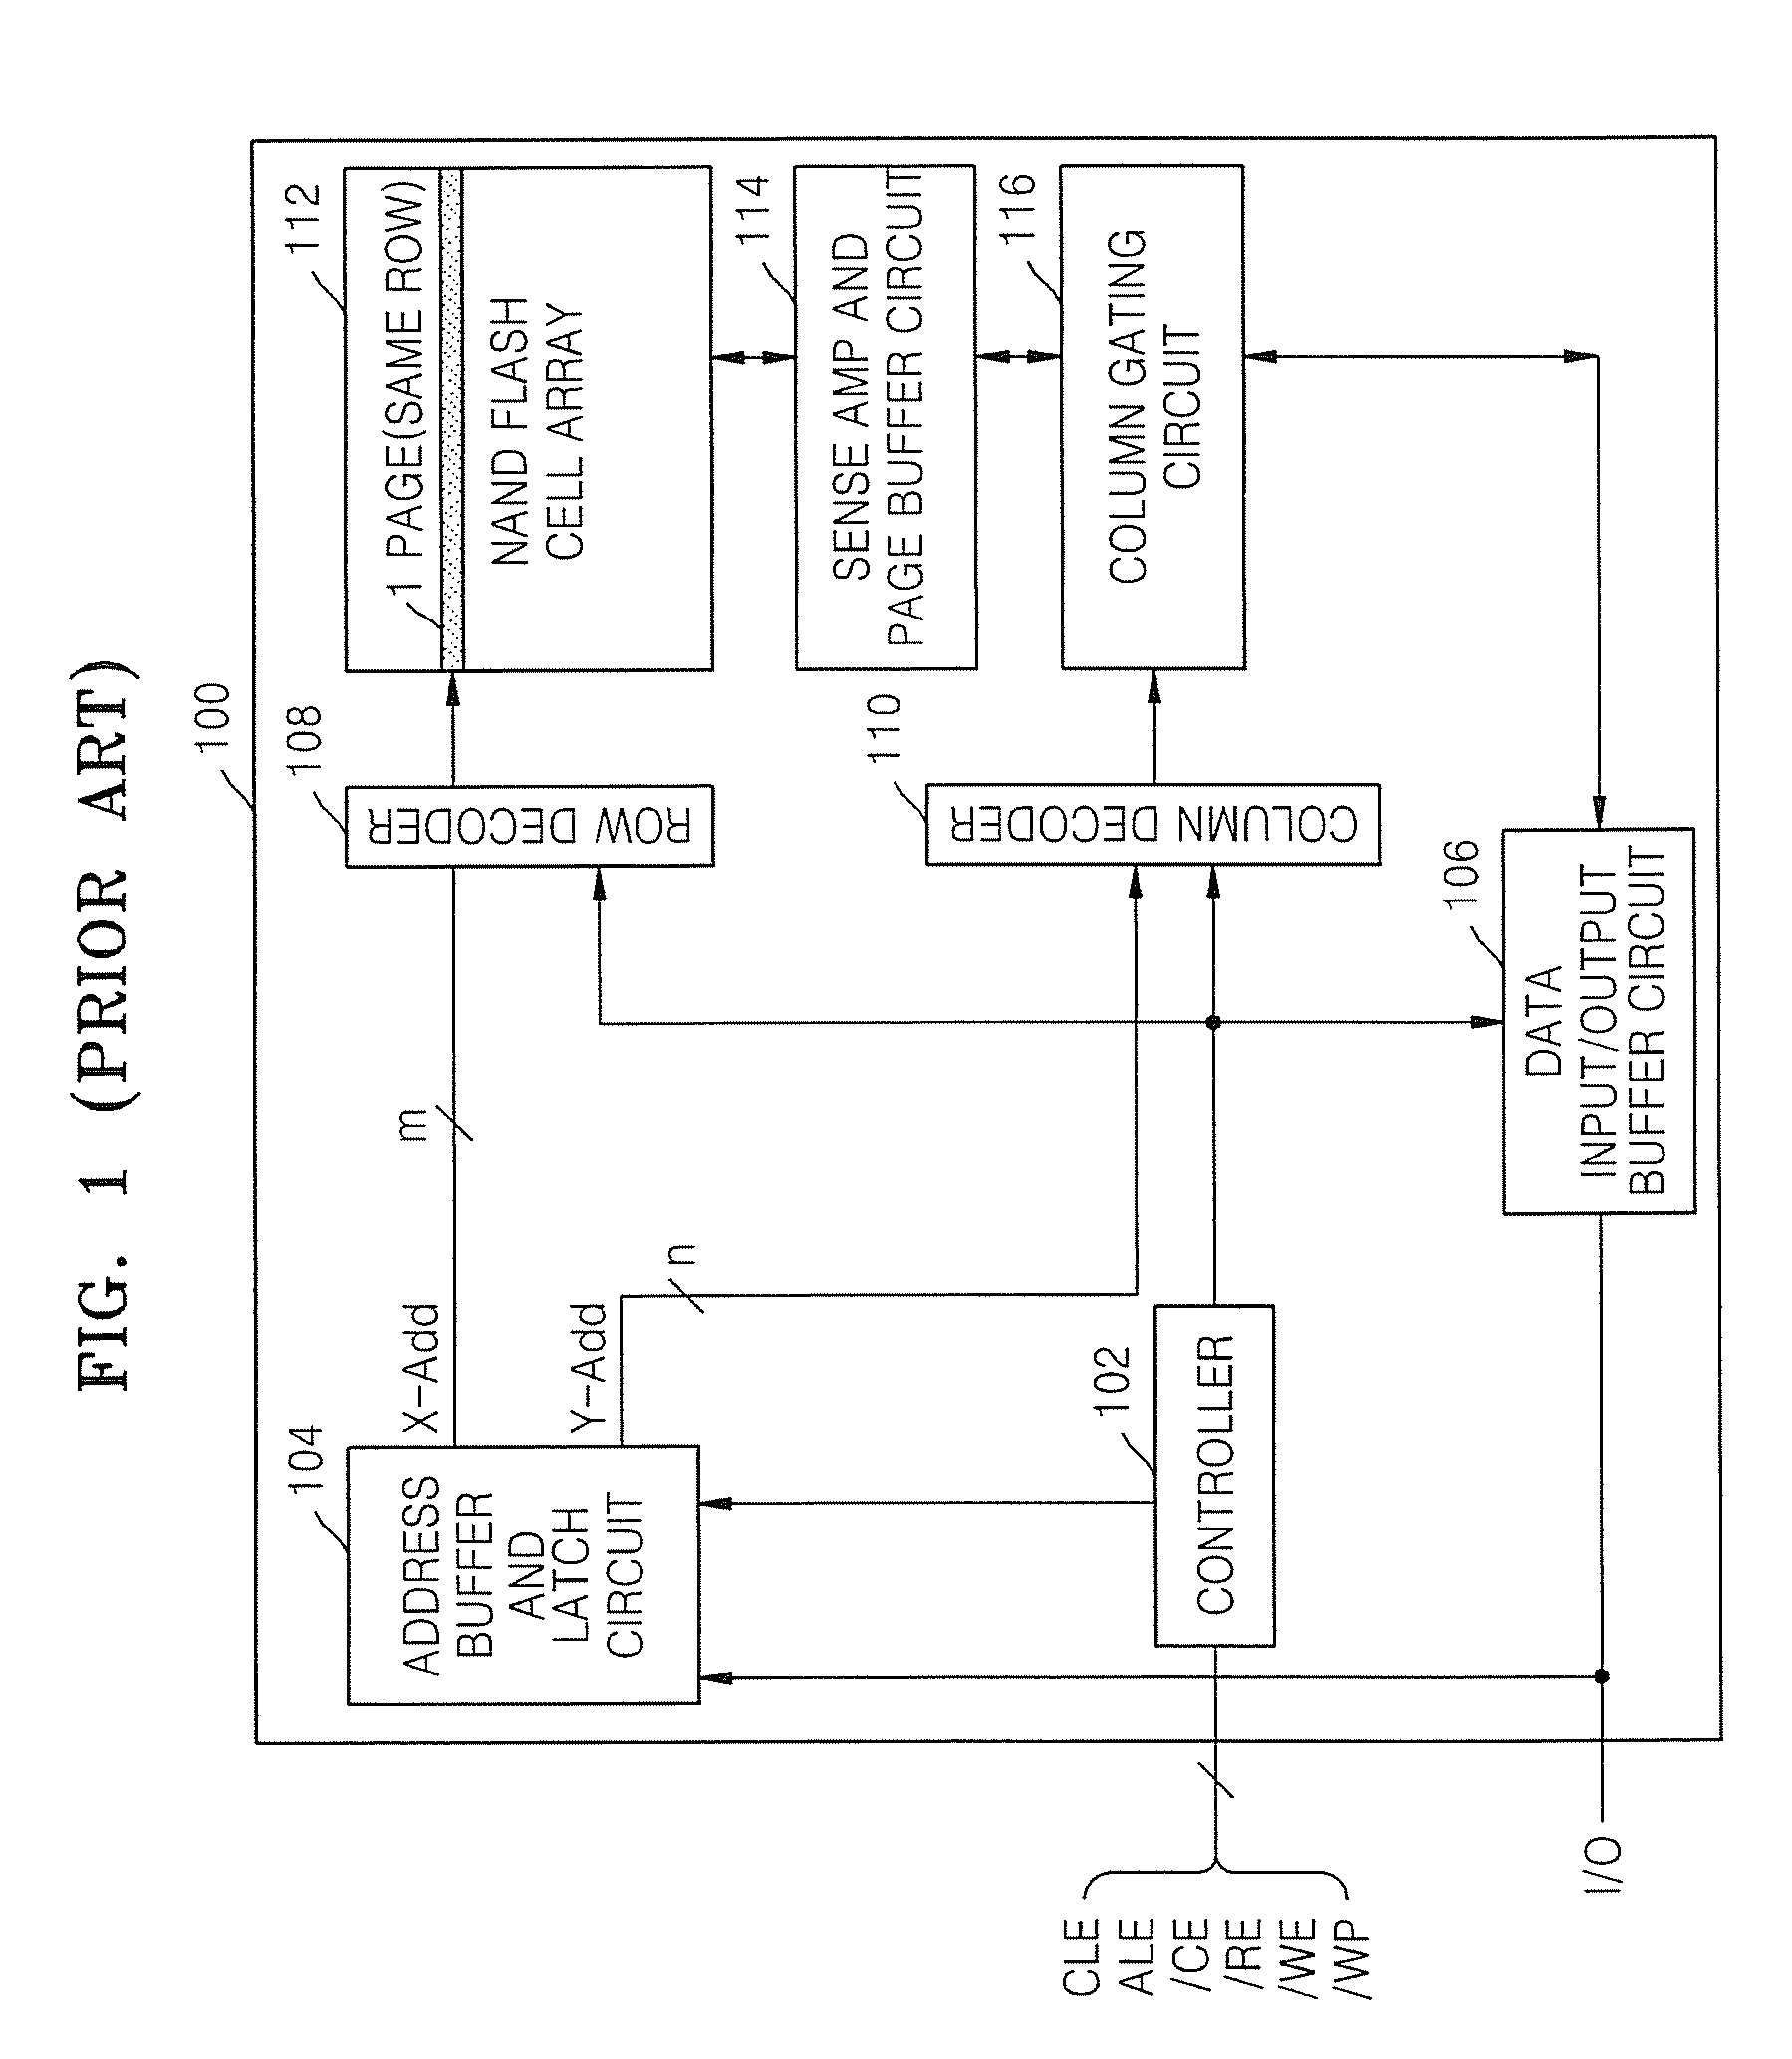 Memory device employing NVRAM and flash memory cells